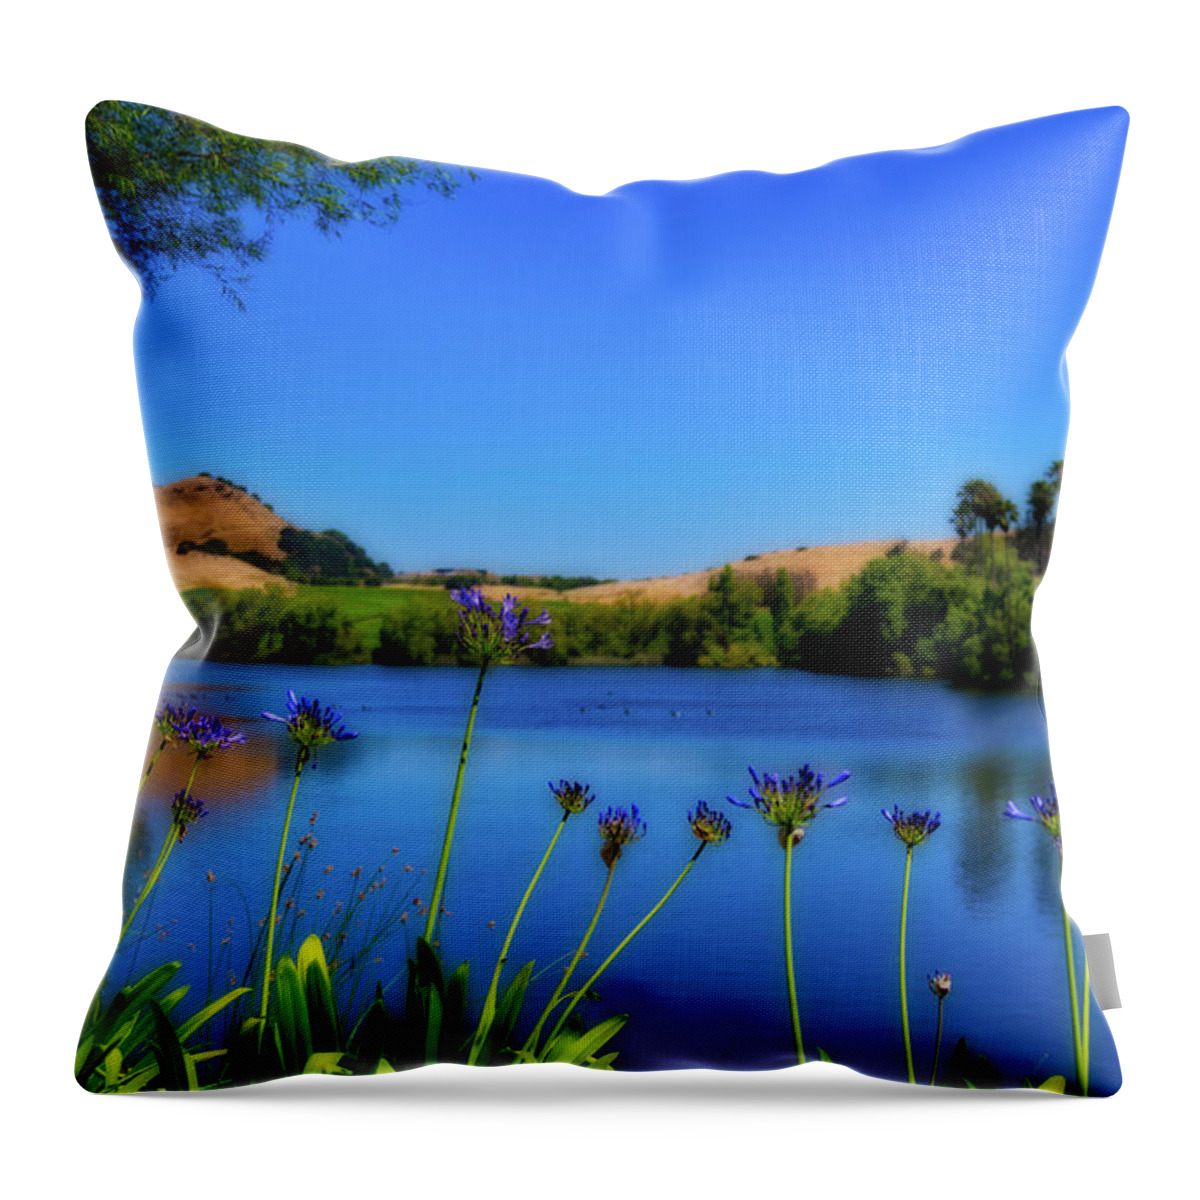 Napa Throw Pillow featuring the photograph Napa Serenity by Stephen Anderson